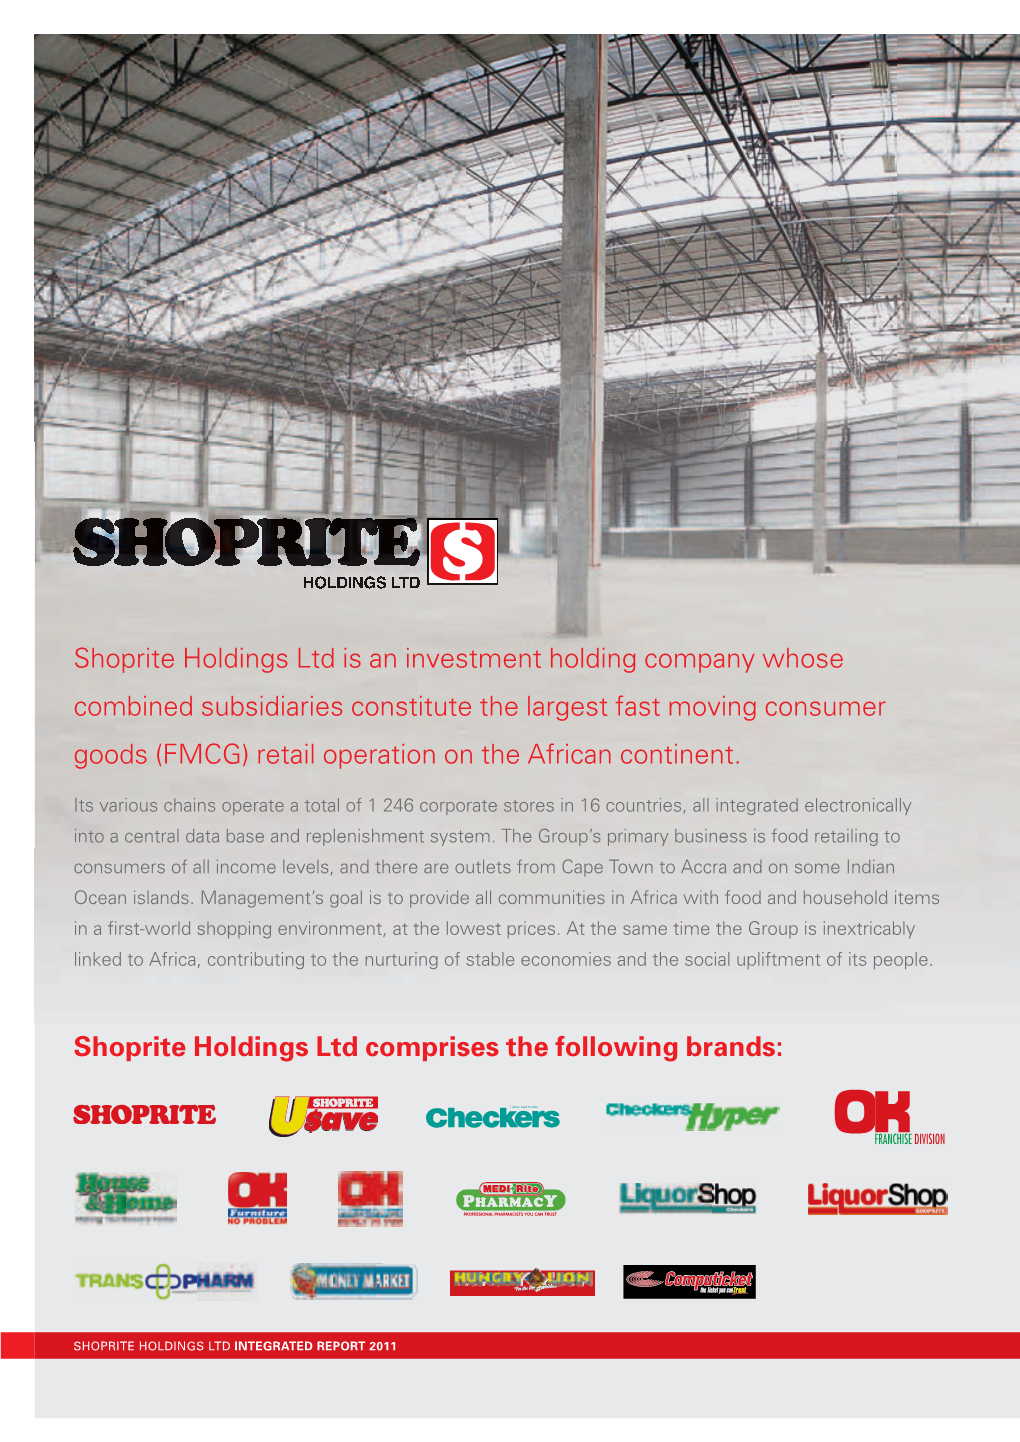 Shoprite Holdings Ltd Comprises the Following Brands